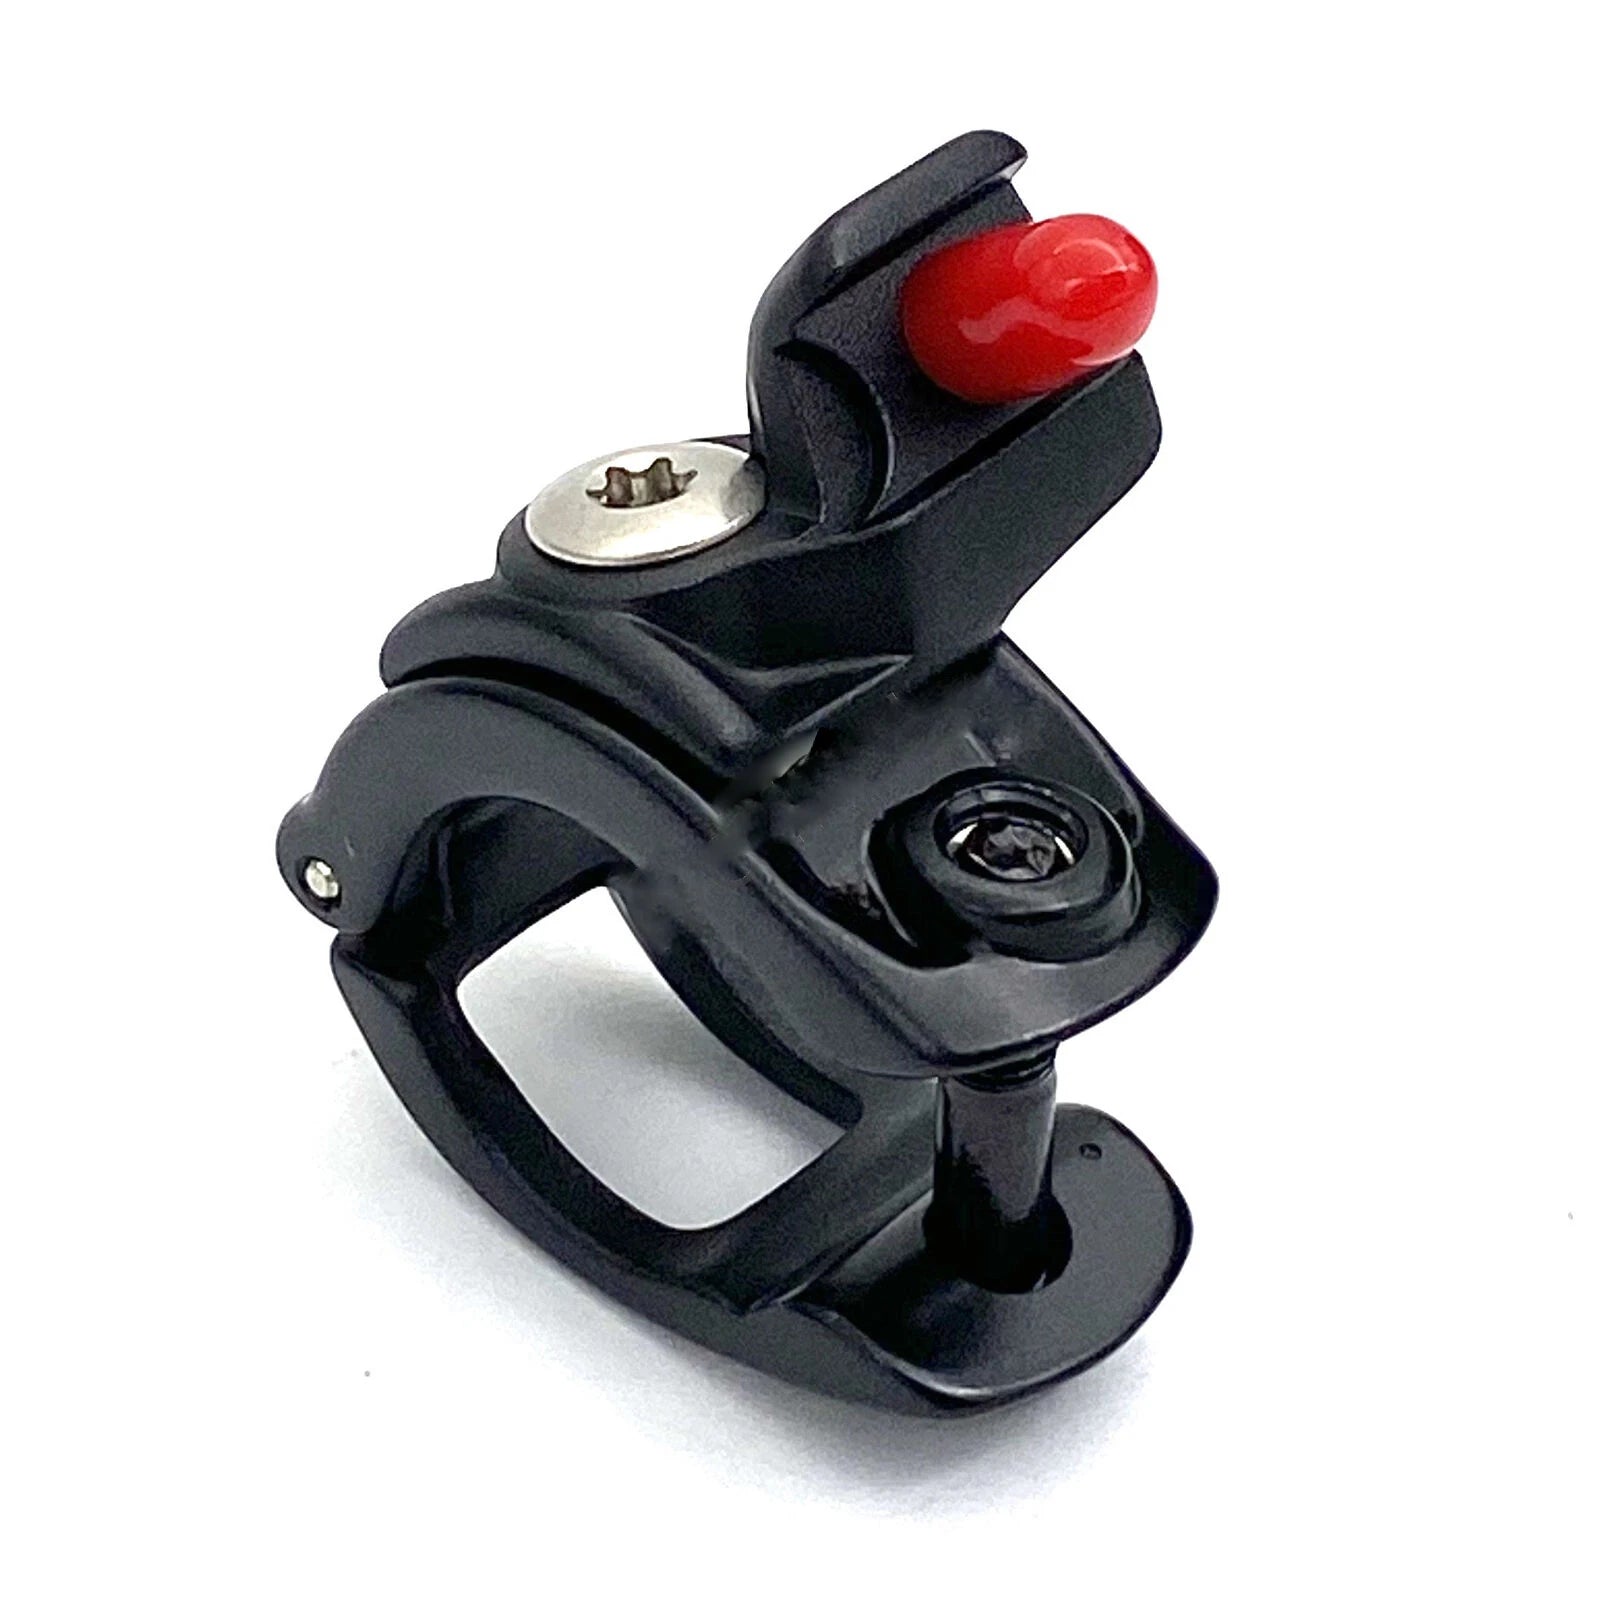 Sram MMX Hinge Clamp with Matchmaker Right Black Bolt